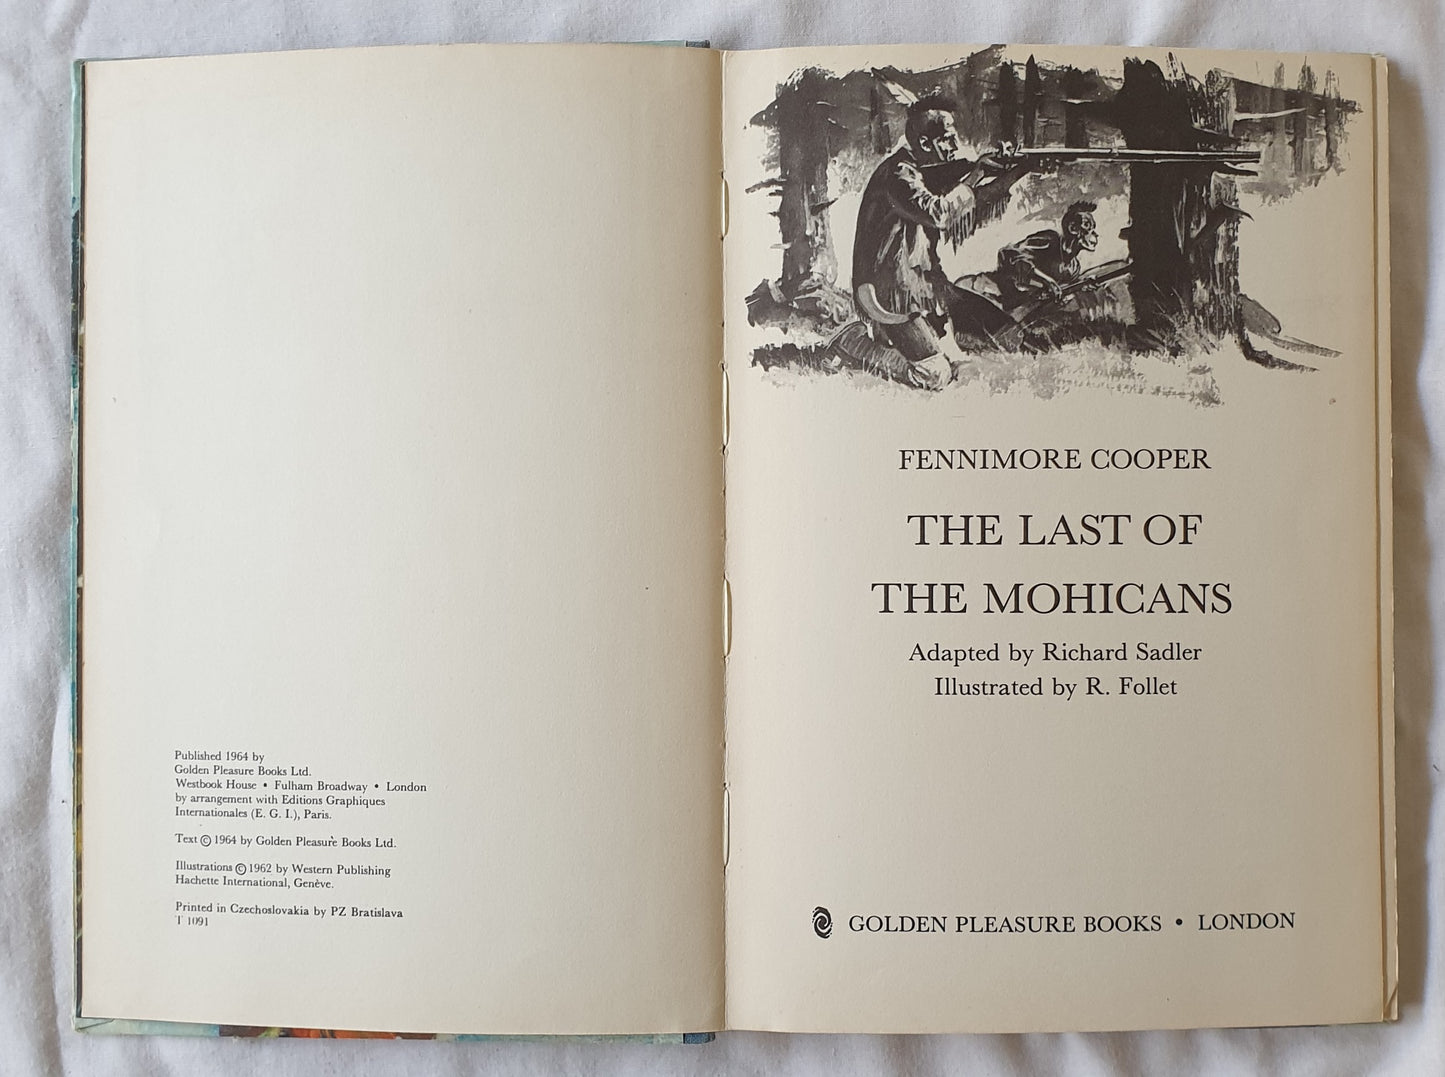 The Last of the Mohicans by Fennimore Cooper